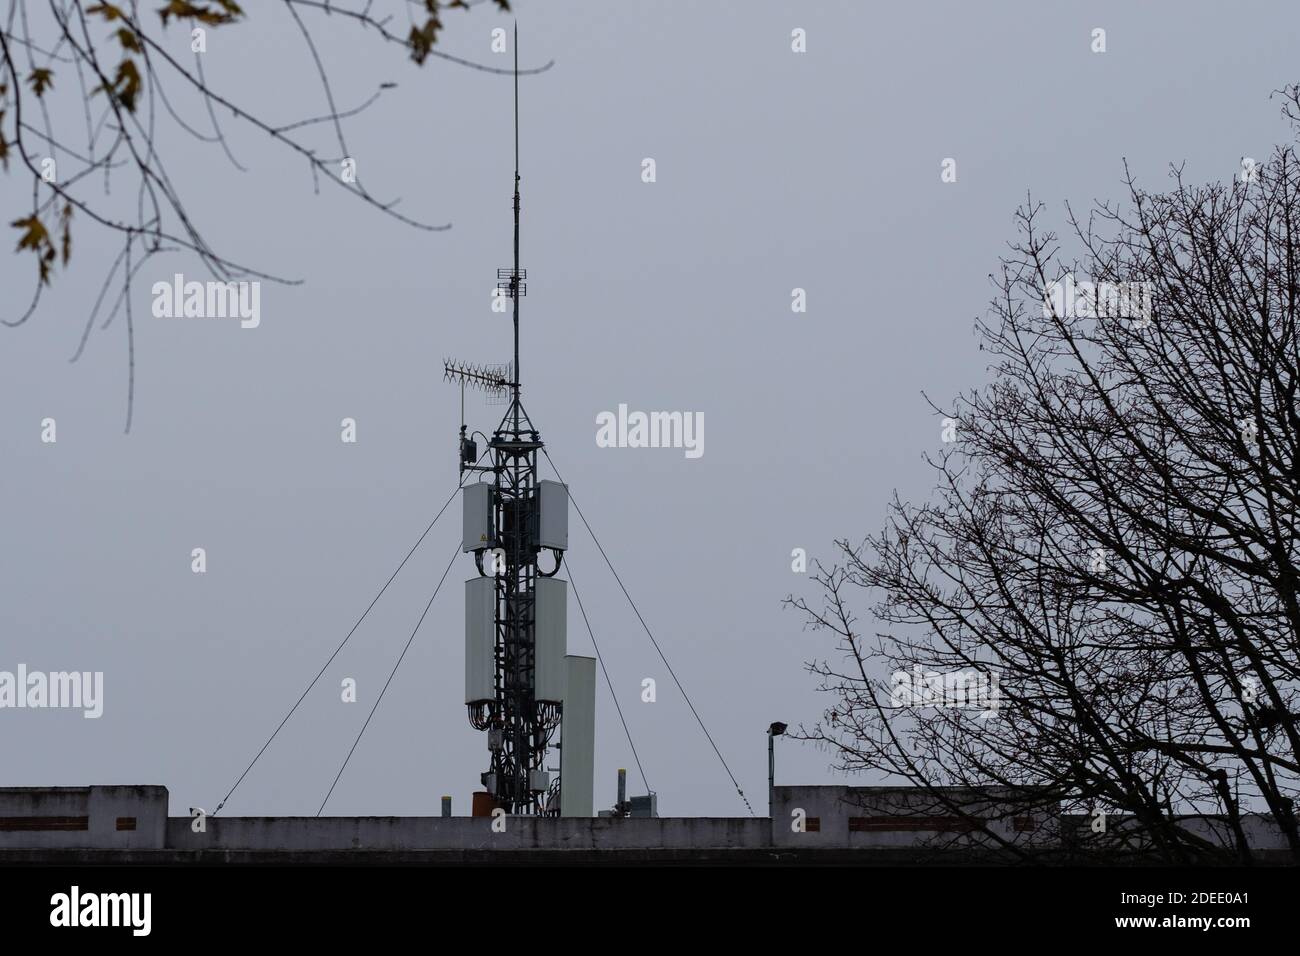 Lille (France) November 30, 2020. Telecoms operator relay antenna capable of broadcasting 2, 3 and 4 G. Stock Photo